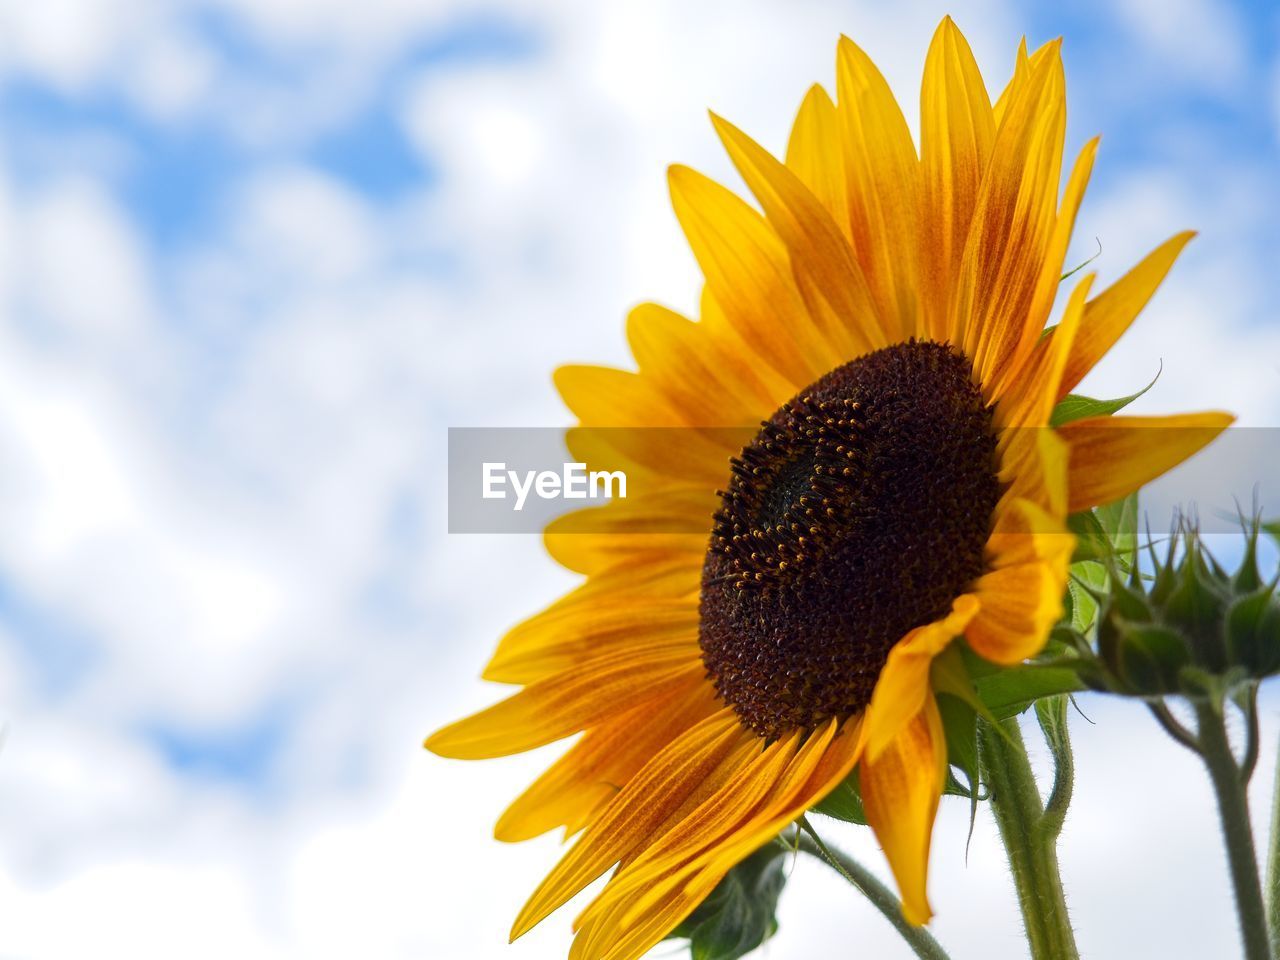 sunflower, flower, flowering plant, plant, yellow, freshness, flower head, beauty in nature, nature, sky, inflorescence, cloud, petal, growth, fragility, field, close-up, sunflower seed, pollen, no people, rural scene, summer, landscape, outdoors, springtime, blossom, vibrant color, macro photography, seed, plant stem, botany, focus on foreground, day, asterales, environment, sunlight, low angle view, land, blue